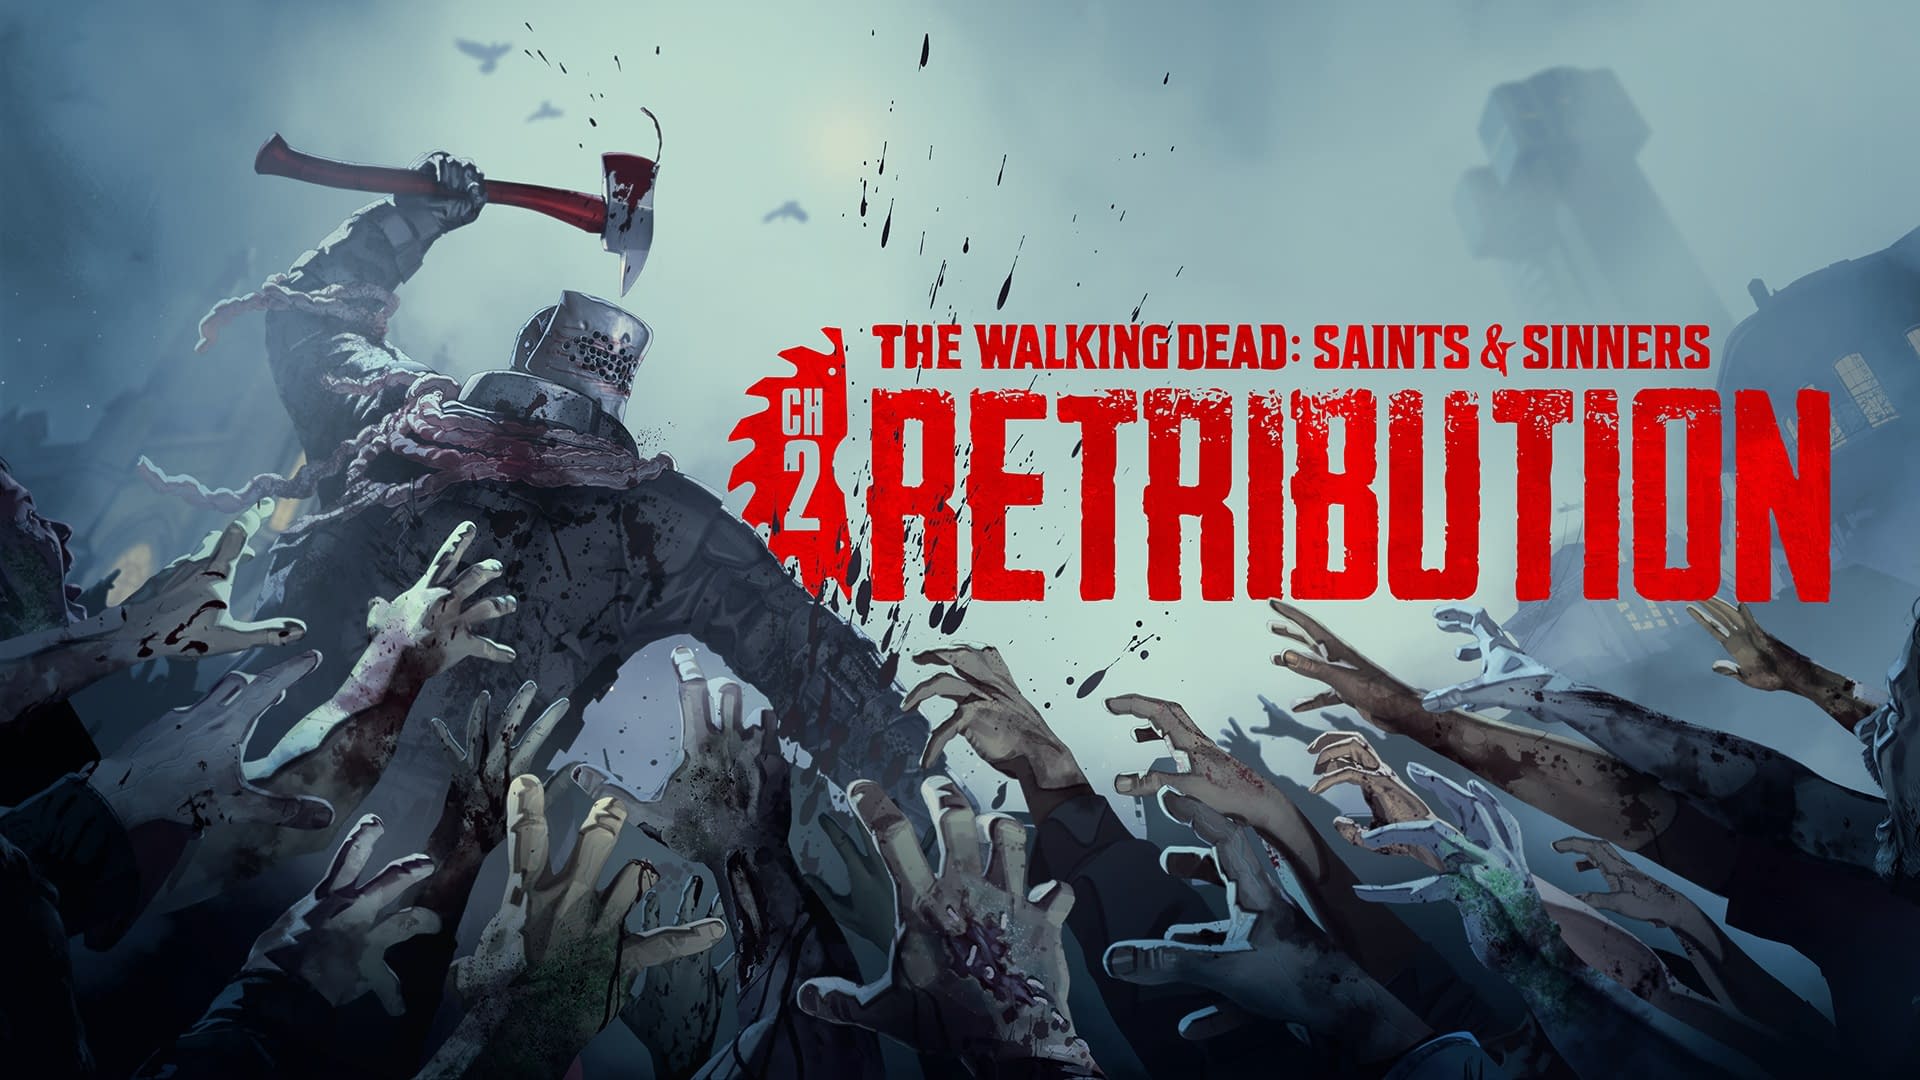 the-walking-dead-saints-and-sinners-chapter-2-retribution-launch